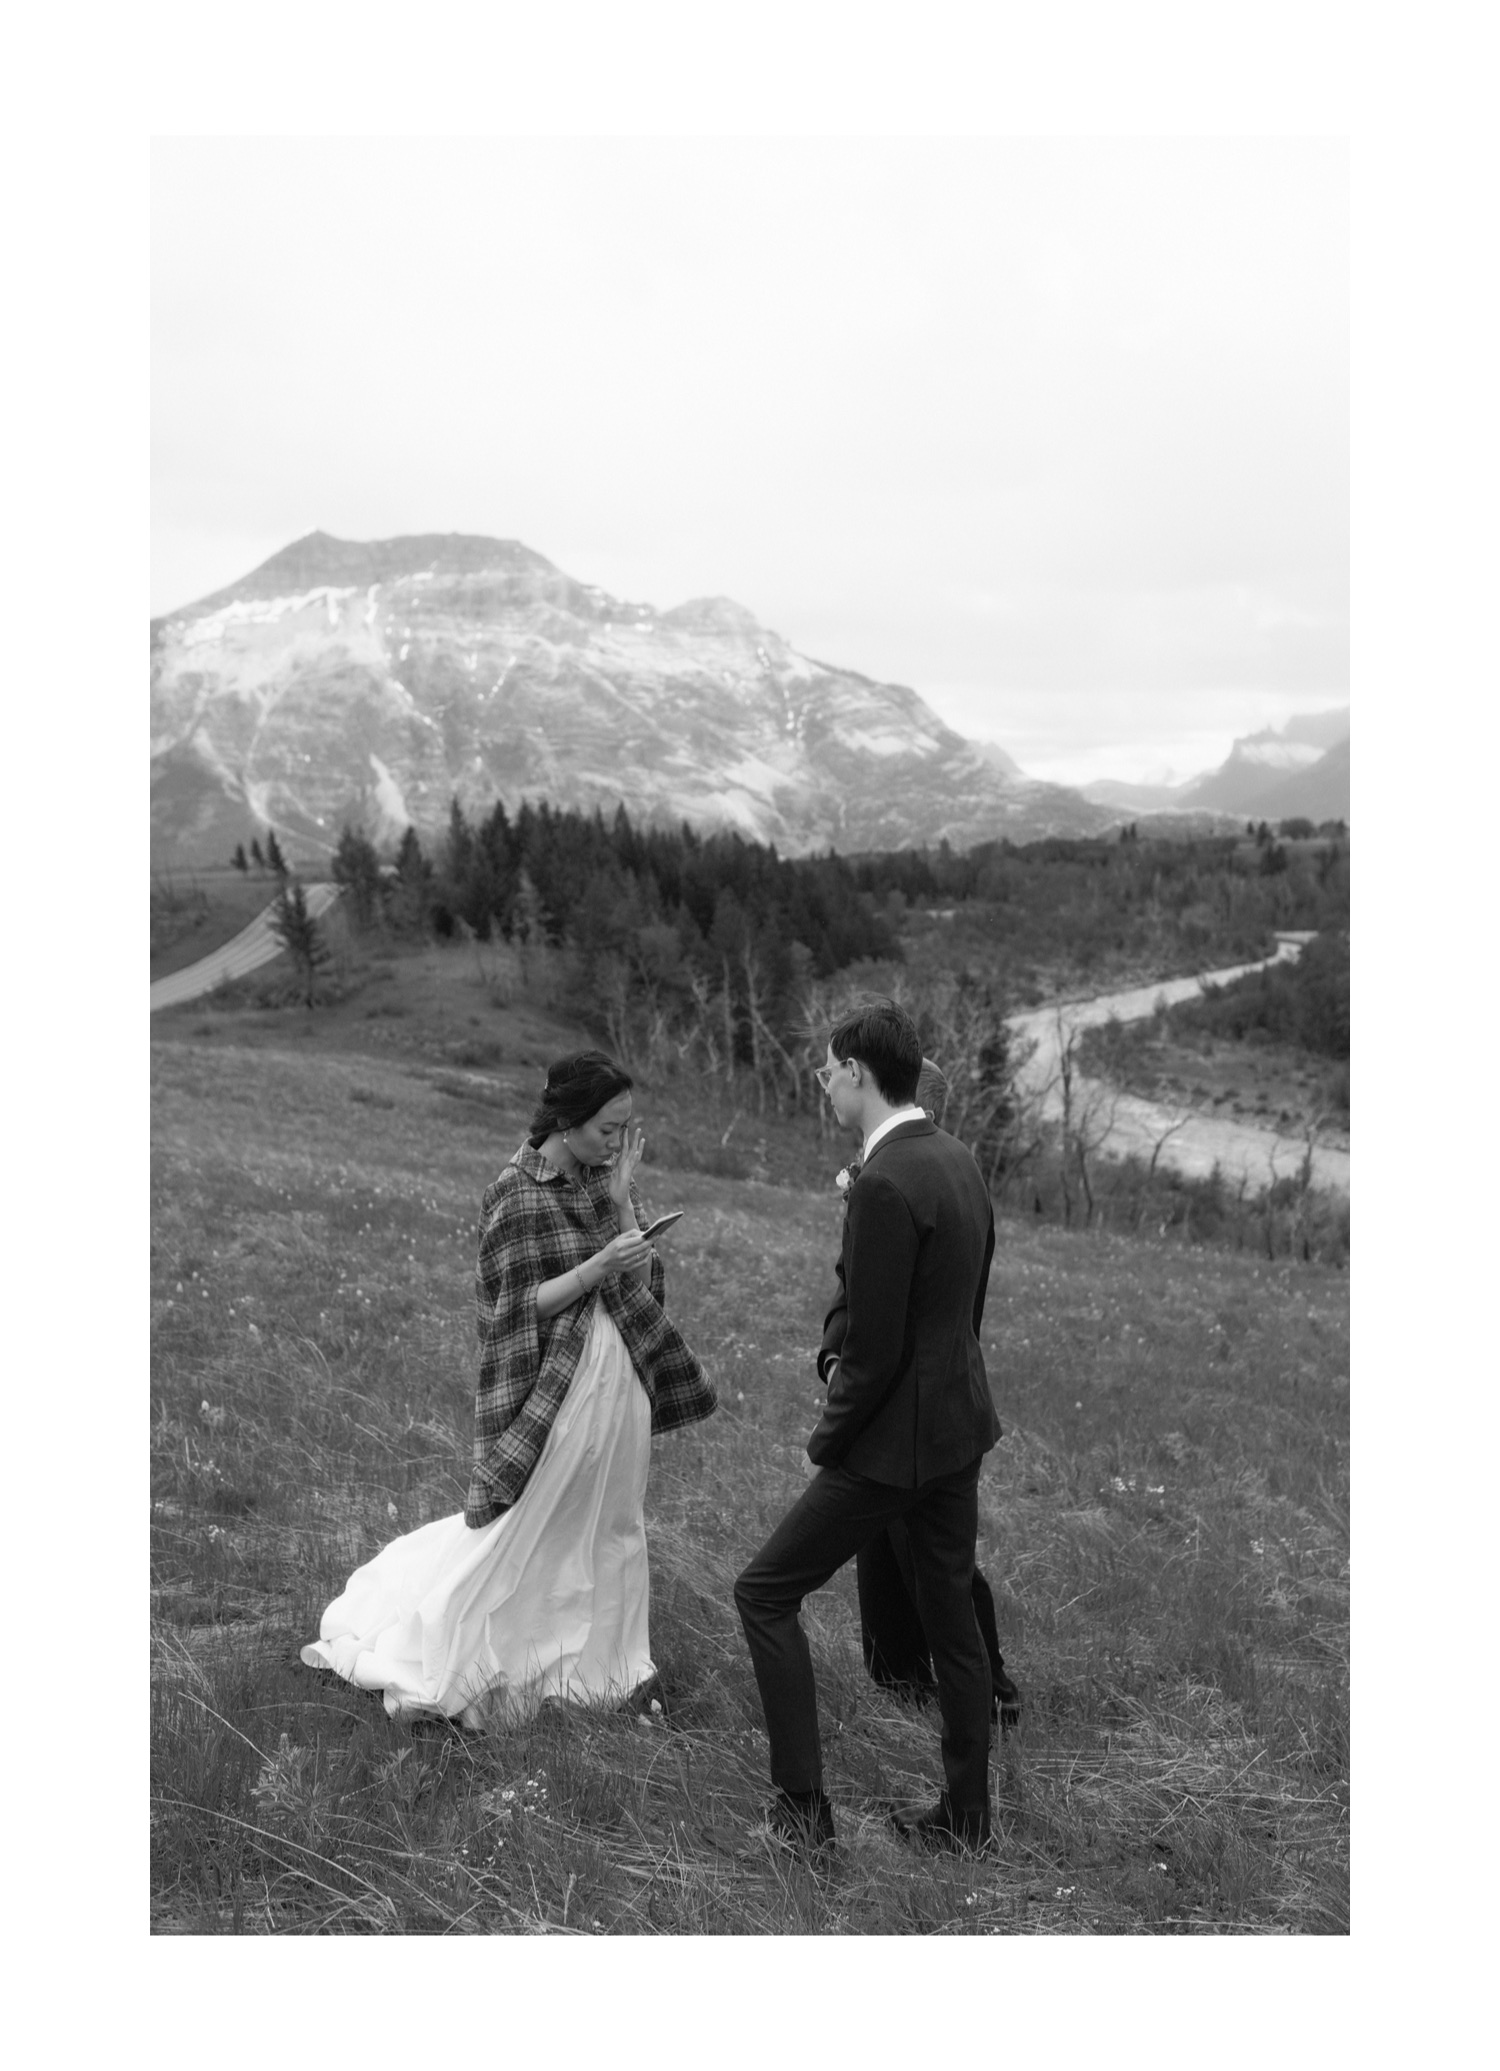 Emotive ceremony along a sideroad in Waterton Lakes National Park in Southern Alberta